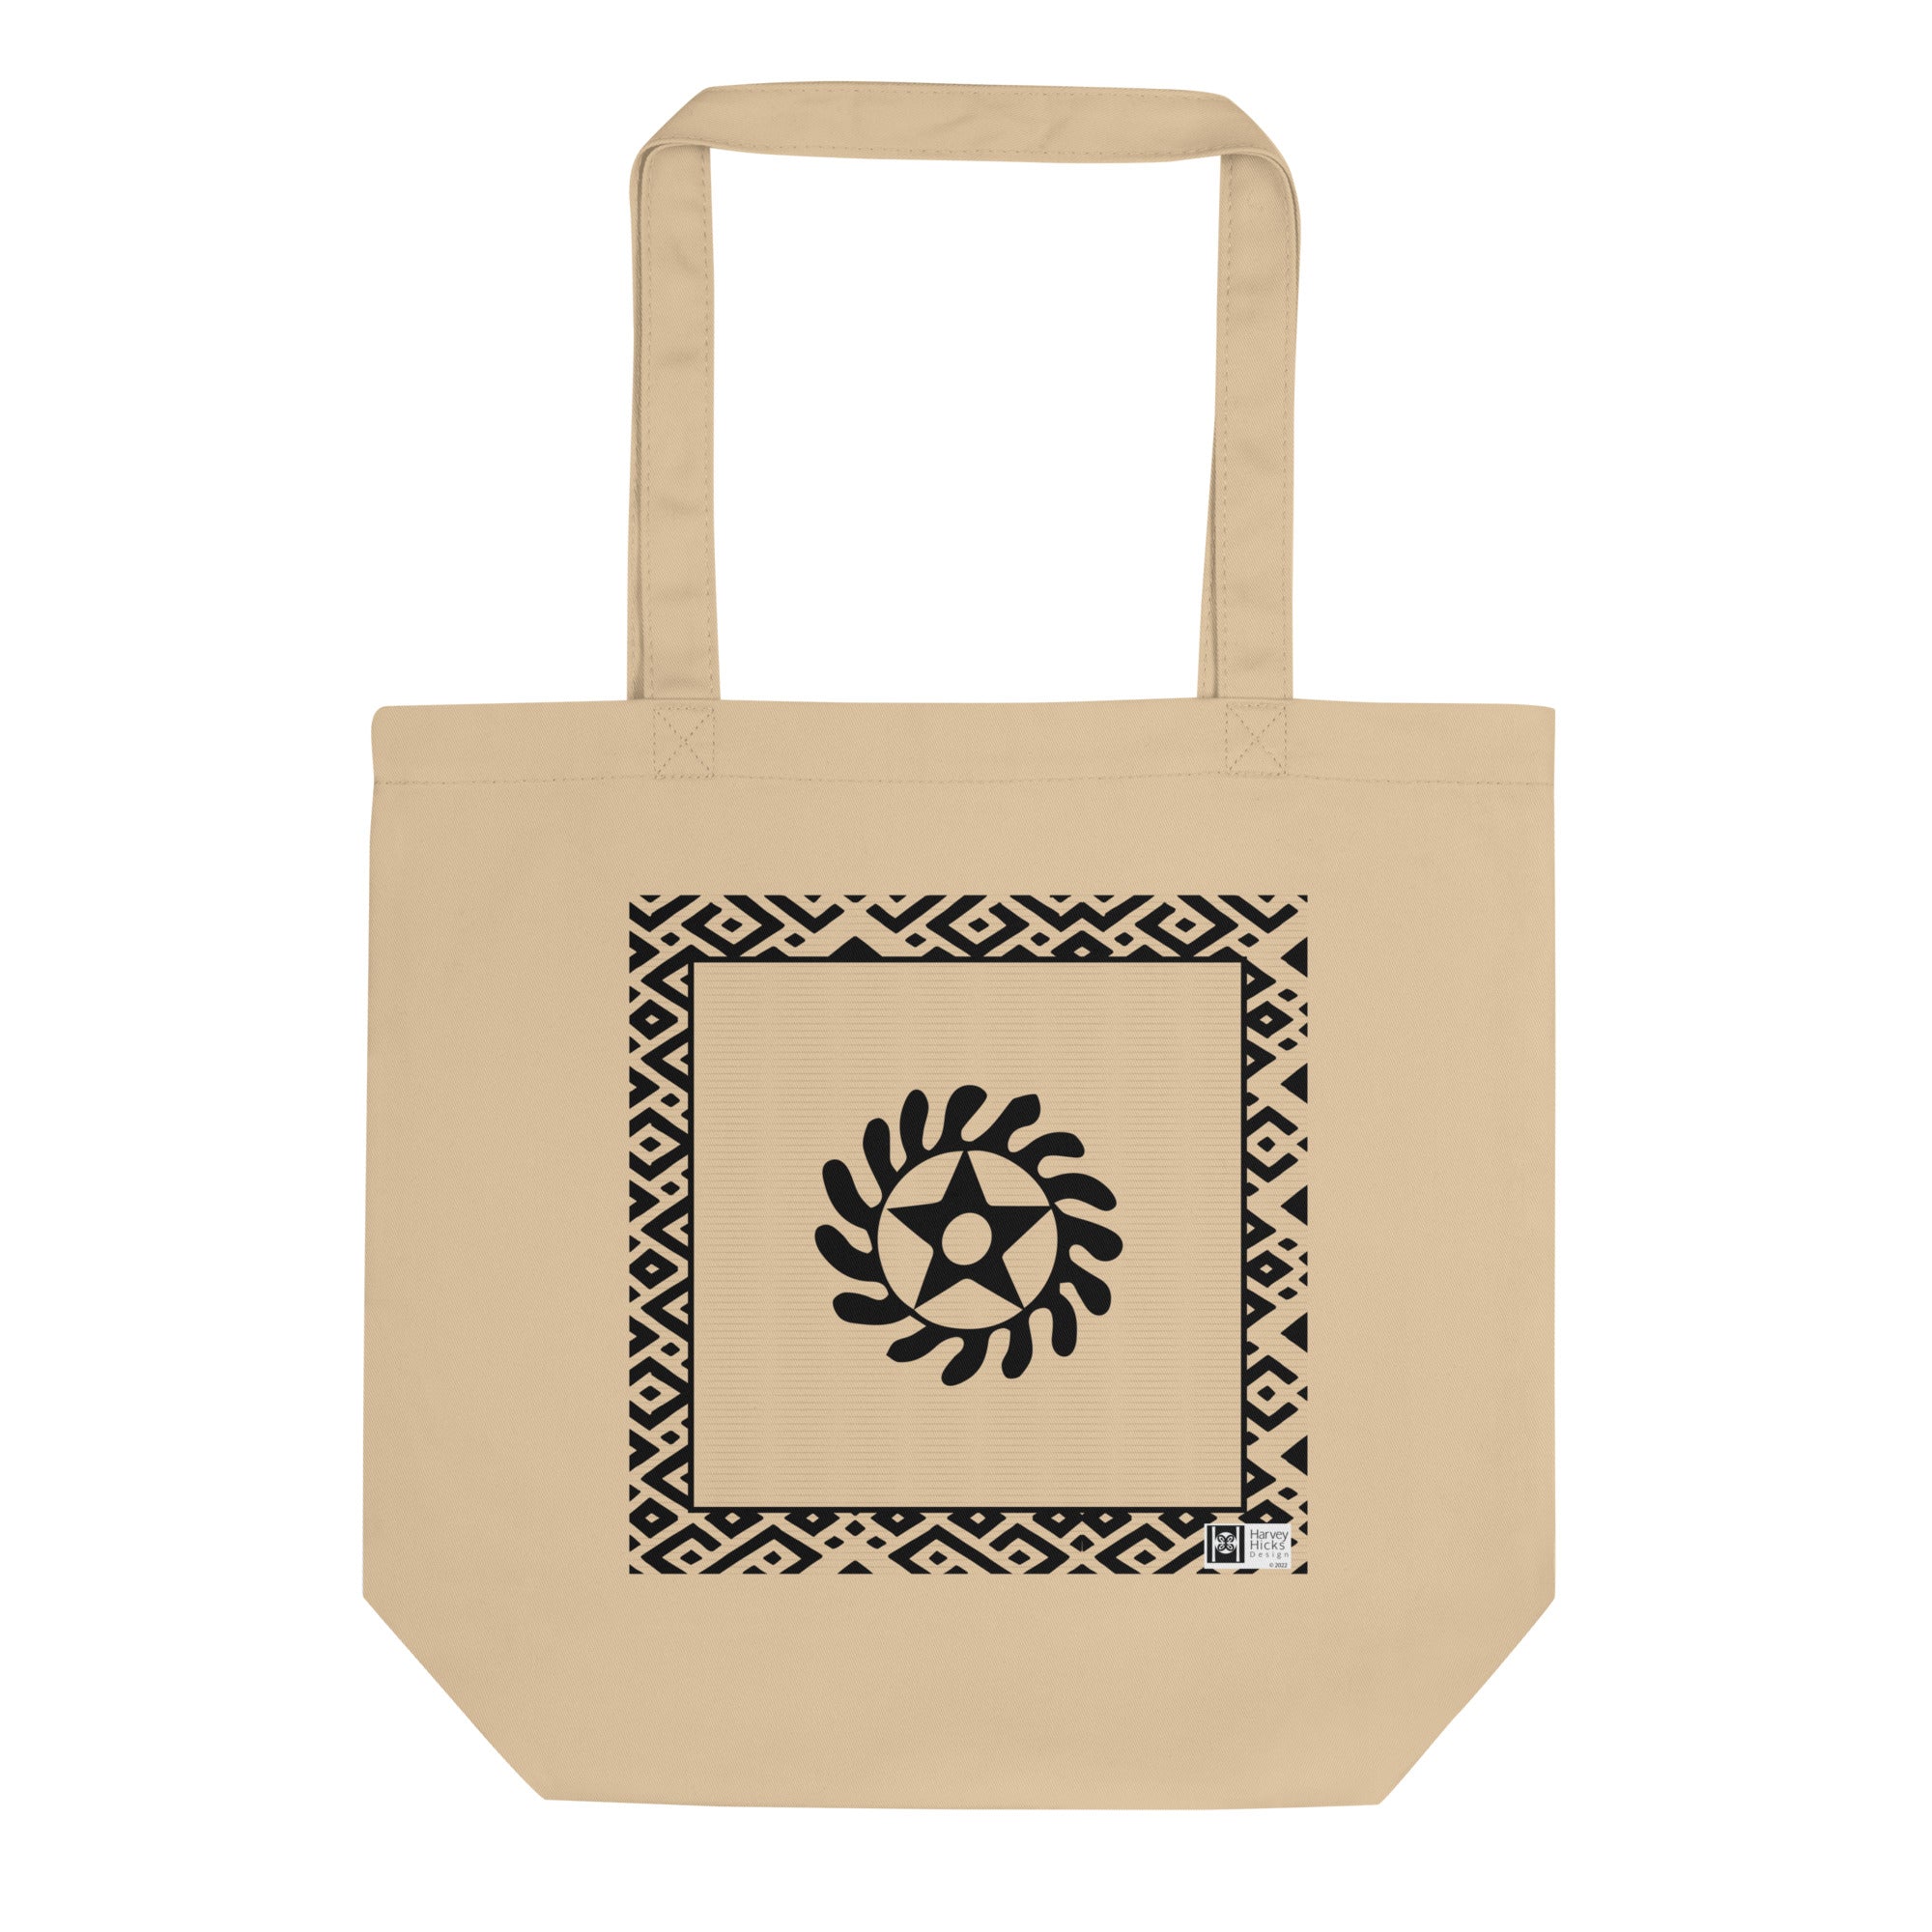 100% cotton Eco Tote Bag, featuring the Adinkra symbol for transformation, NO TEXT